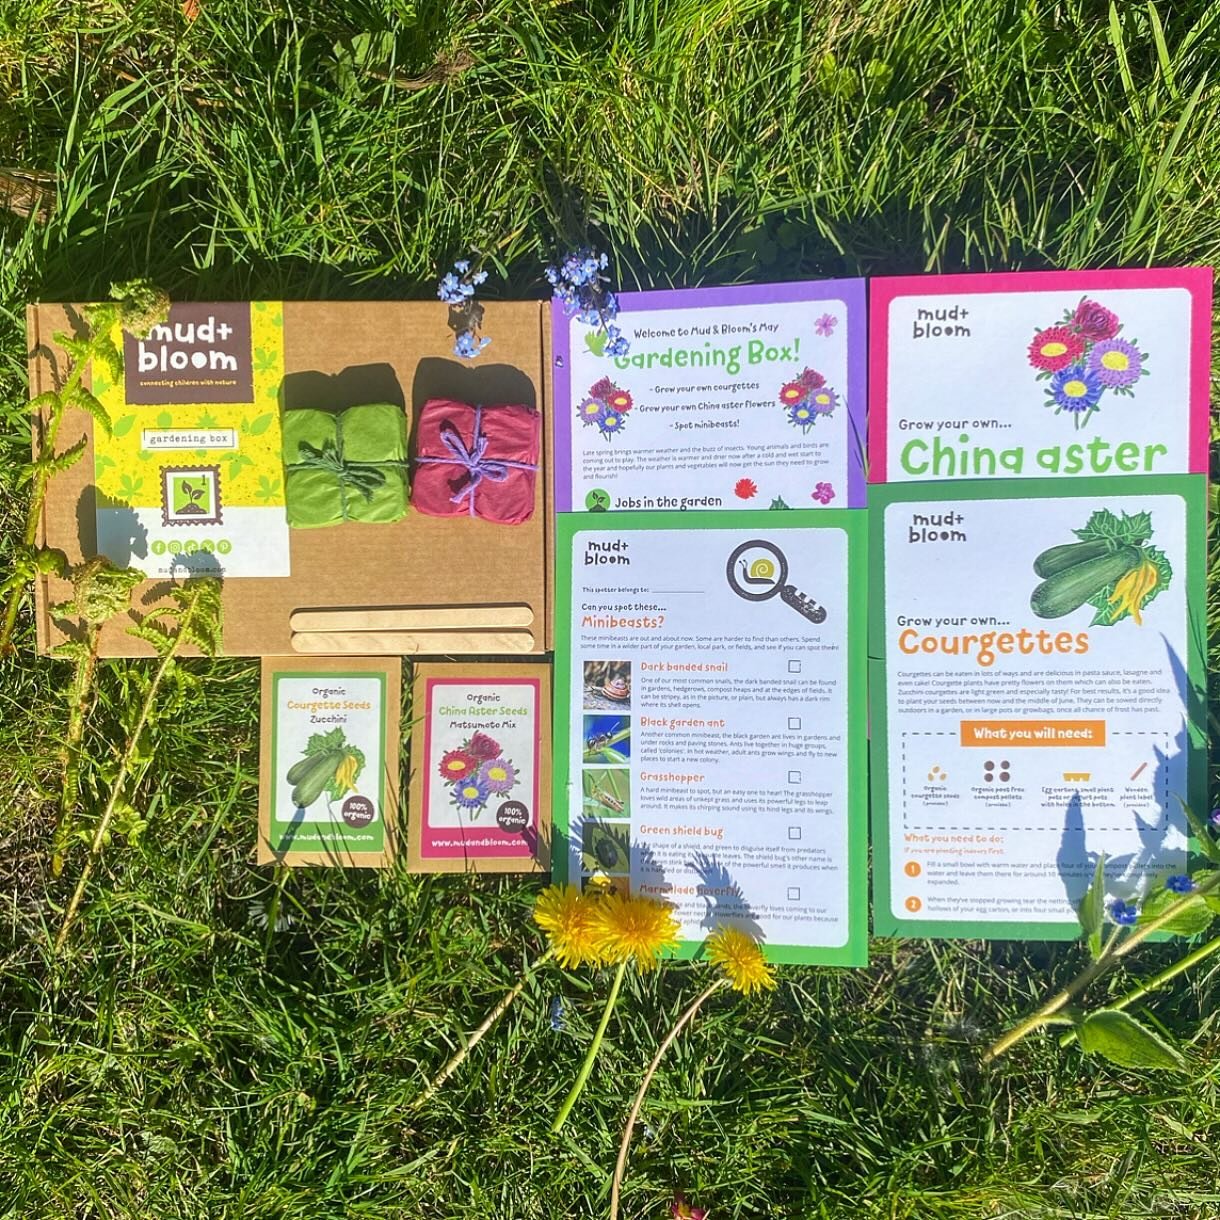 Our May standalone gardening box is now available to order! 🌱🌸

This months box includes the following:
🌱Organic courgette seeds
🌸Organic China aster seeds
🌼May gardening jobs card
🐌Minibeasts spotter

Our seeds are certified organic and biodyn